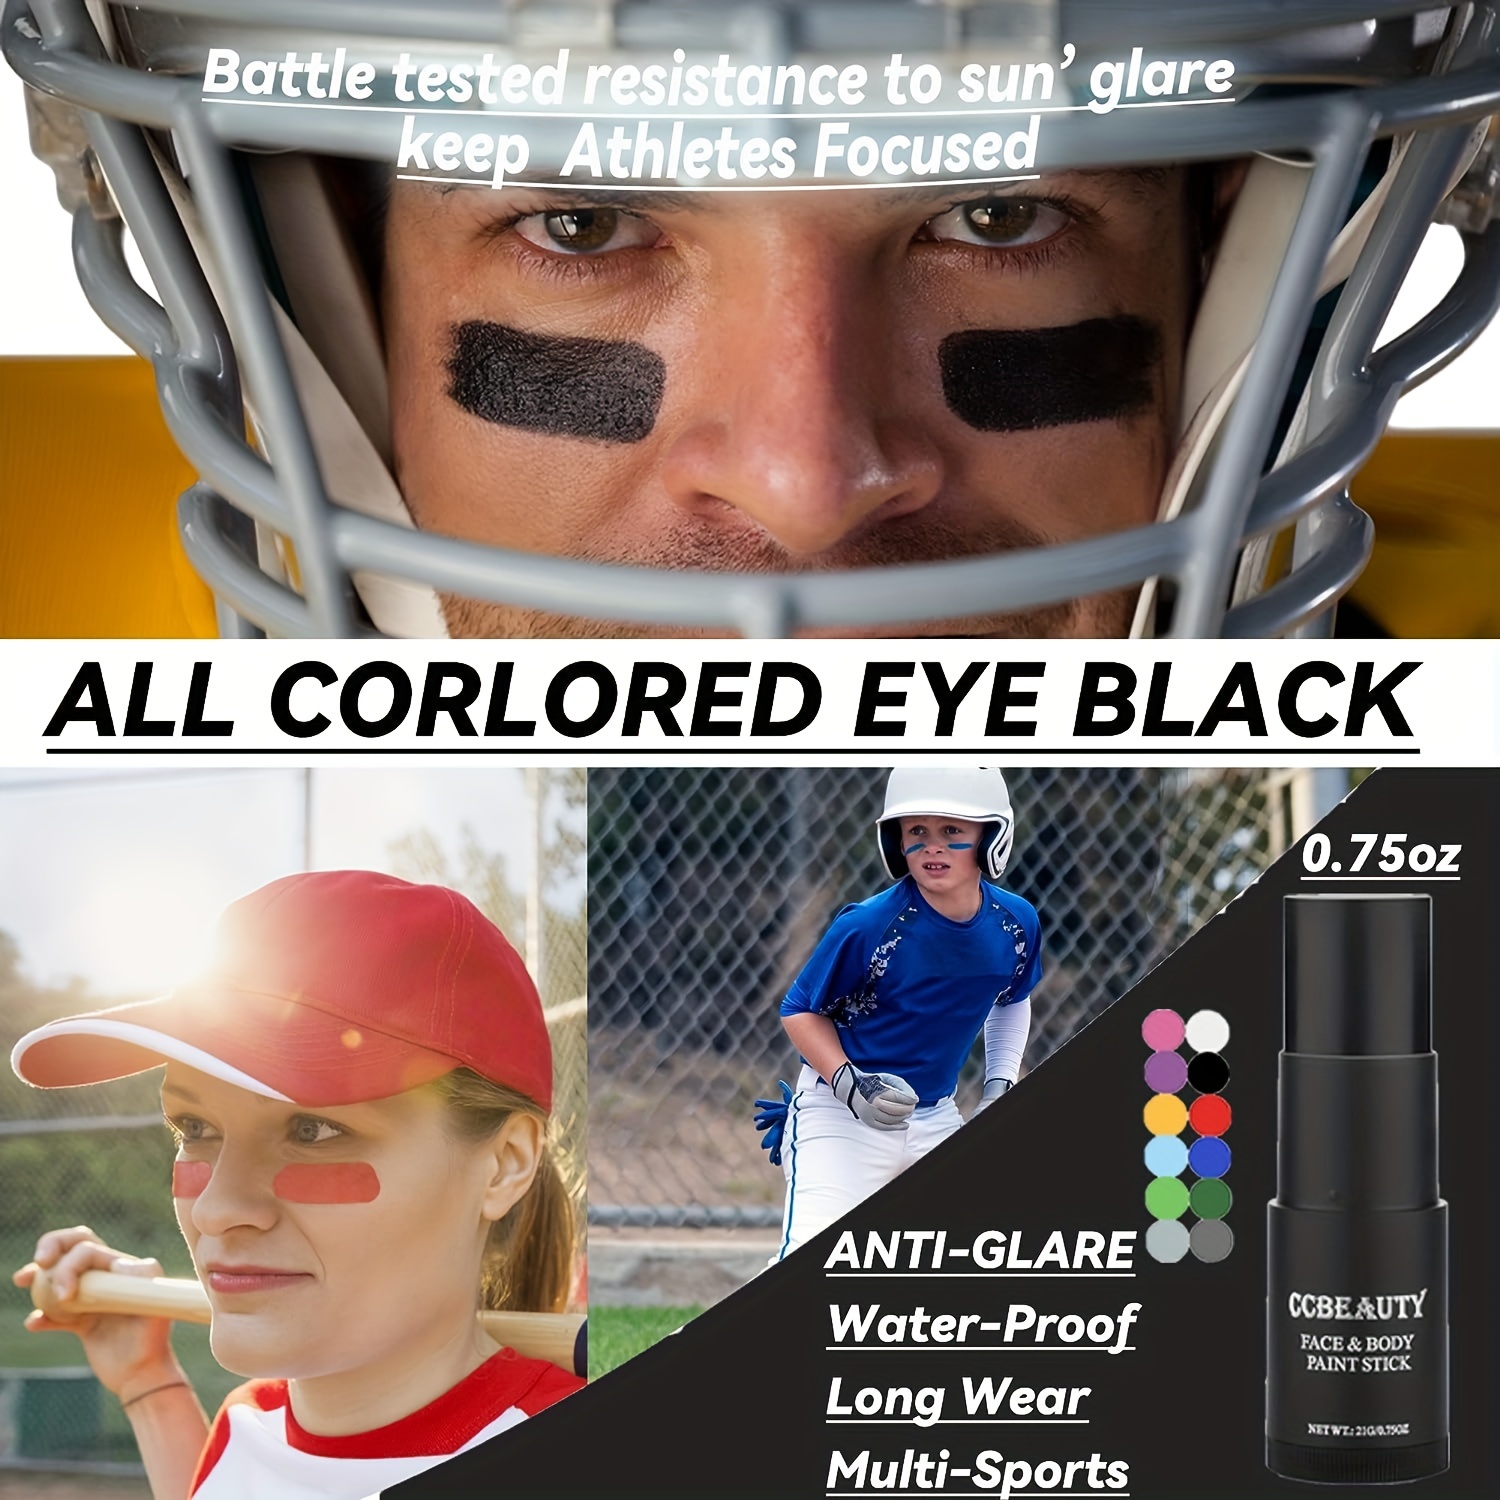 How Effective is the Eye Black that Athletes Wear?